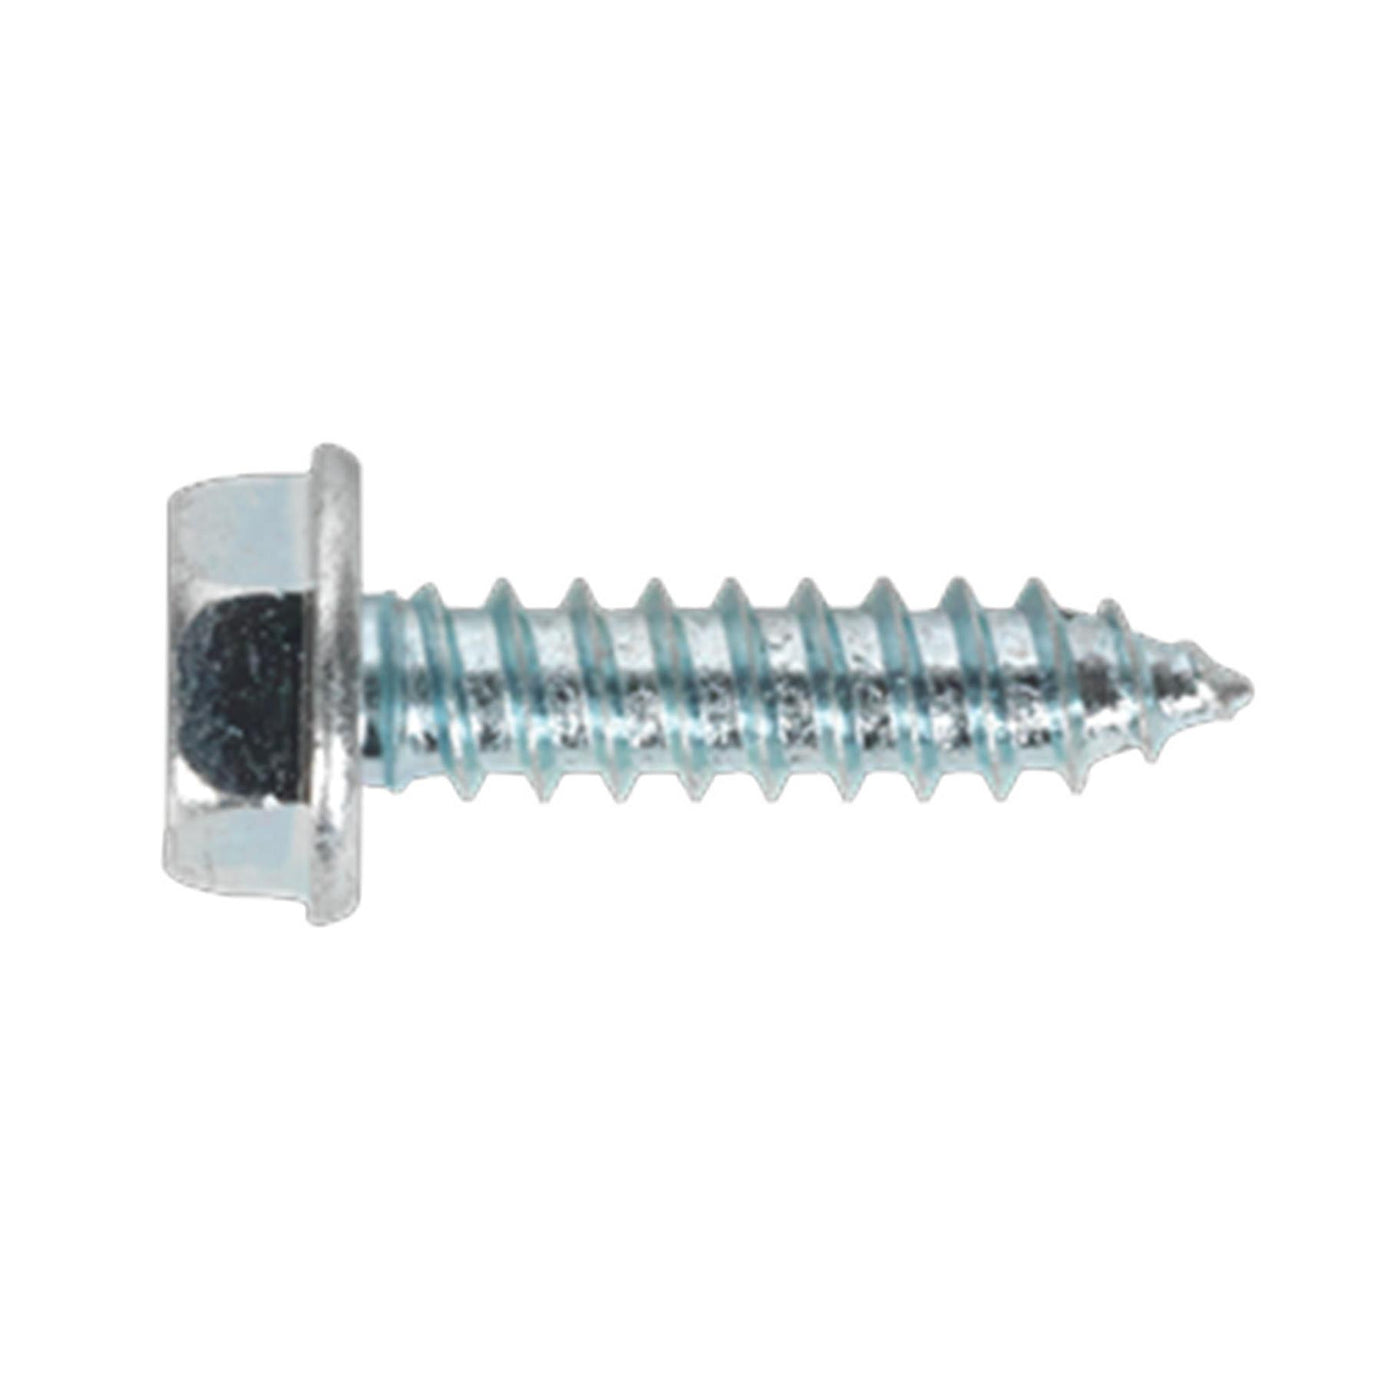 Sealey Acme Screw Washer Faced Zinc #10 x 3/4" Pack of 50